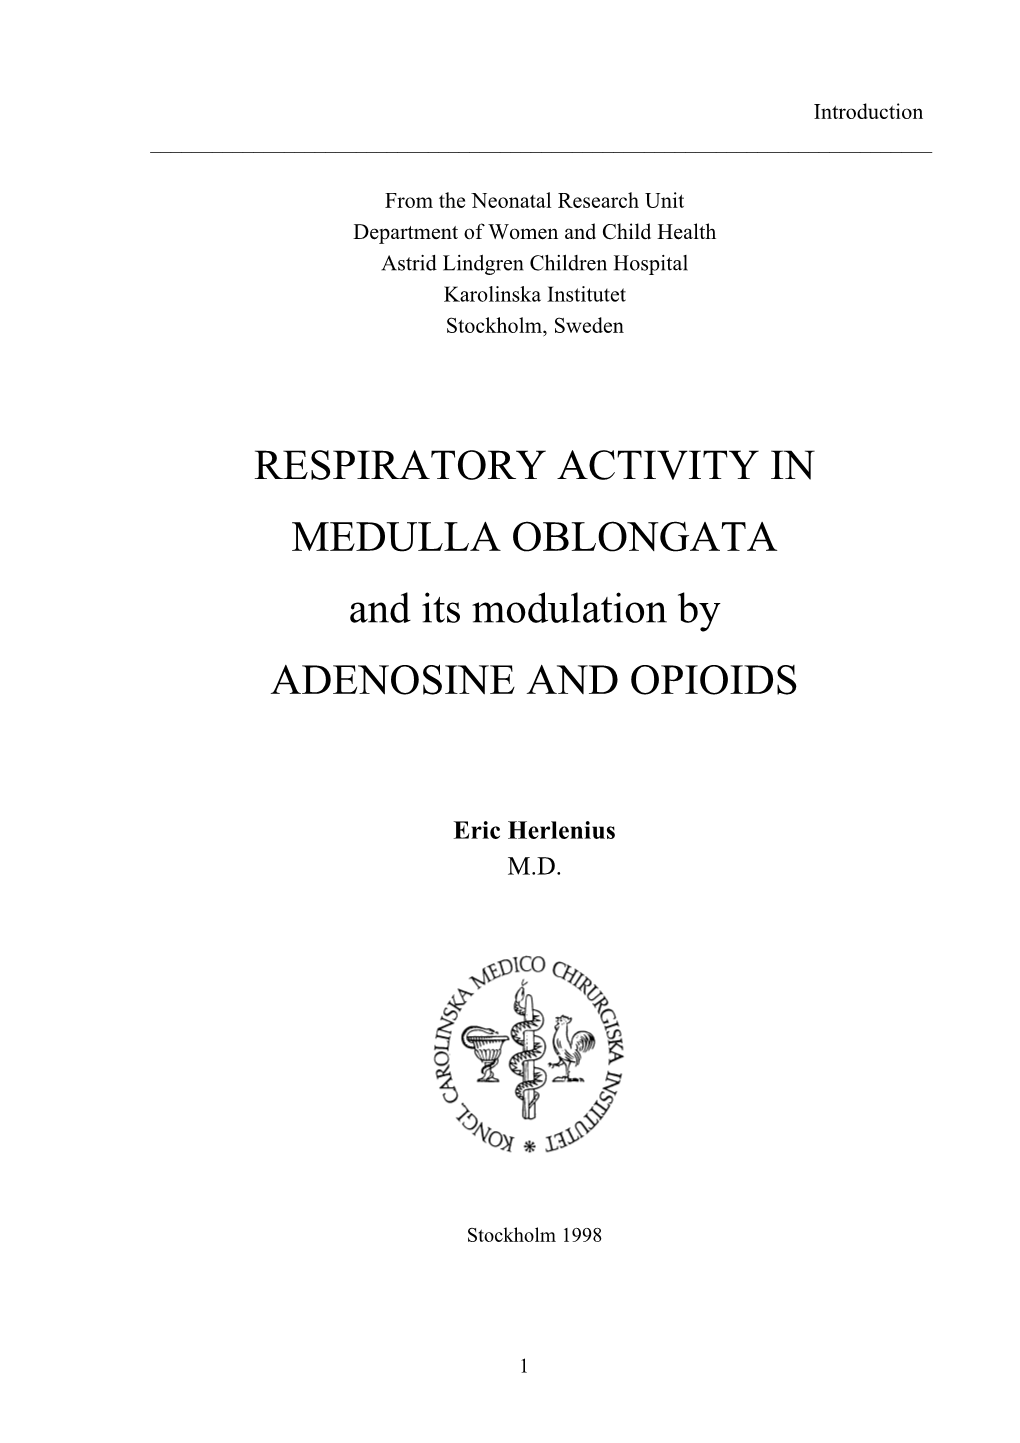 RESPIRATORY ACTIVITY in MEDULLA OBLONGATA and Its Modulation by ADENOSINE and OPIOIDS